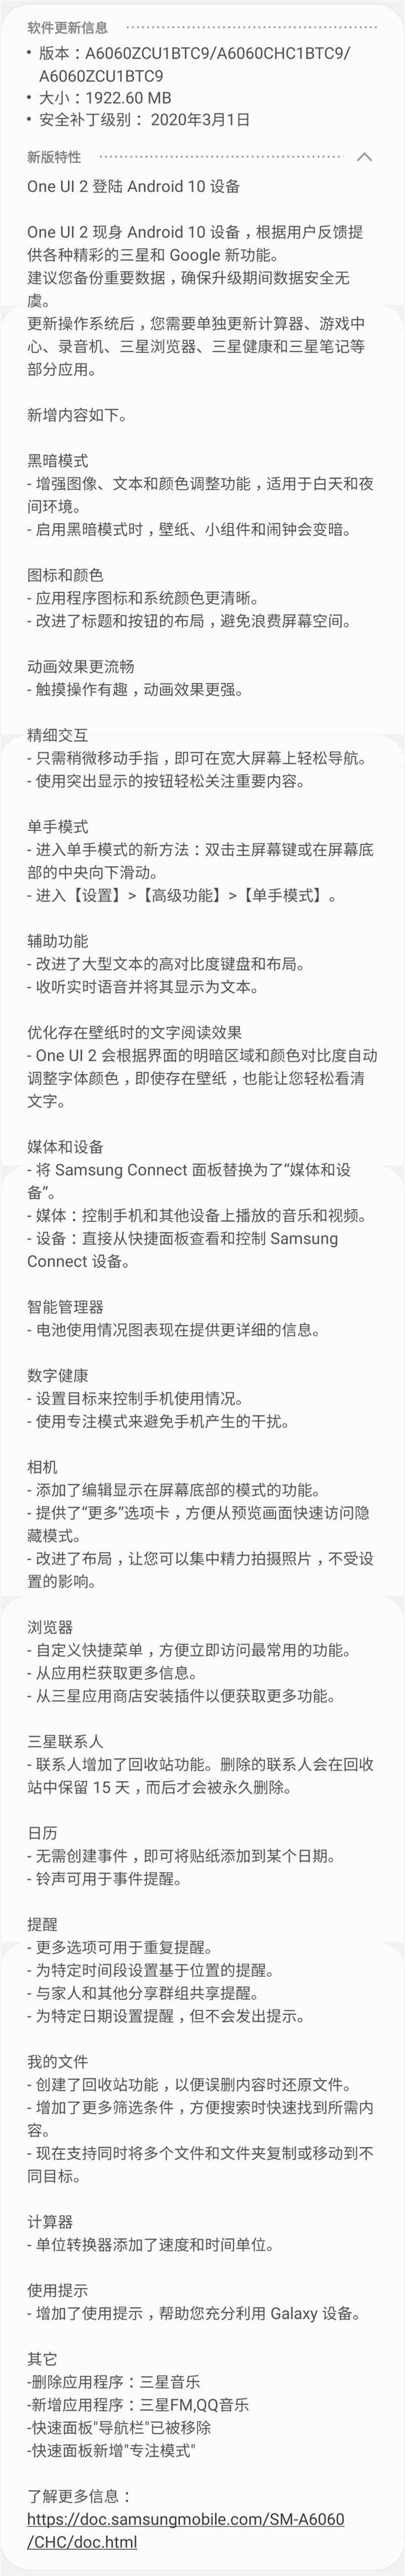 Galaxy A60ԪOne UI 2.0£Android 10